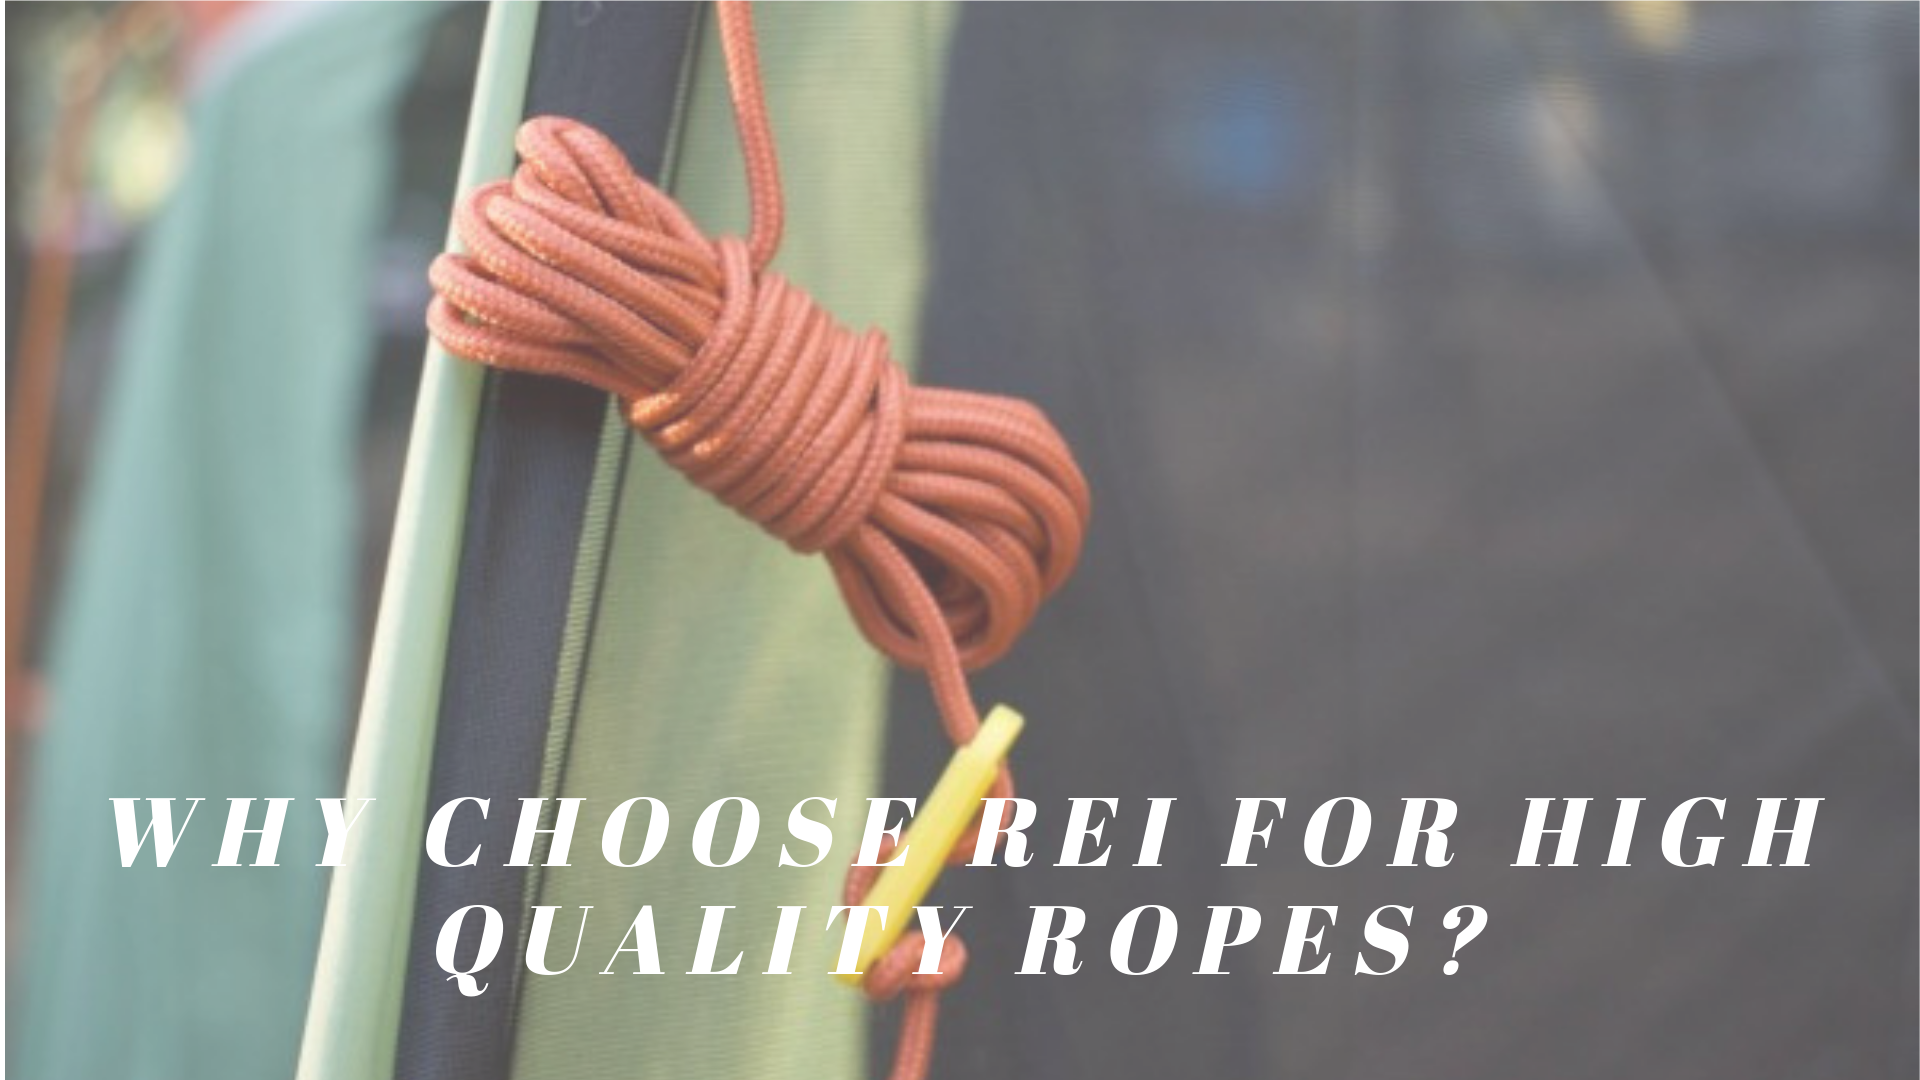 why-choose-rei-for-high-quality-ropes